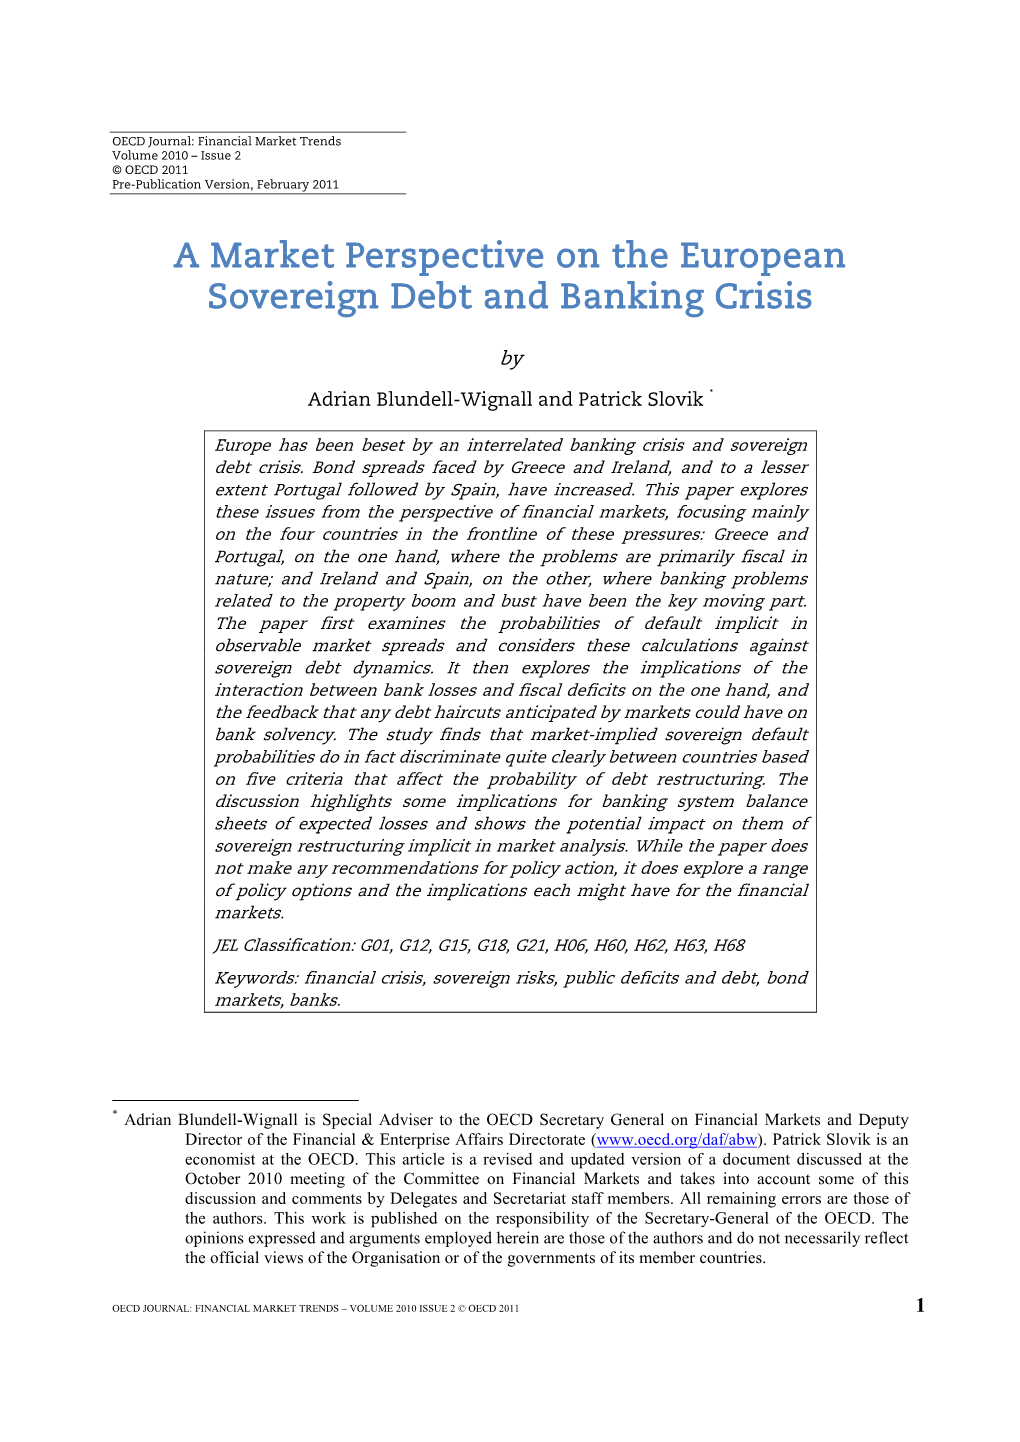 A Market Perspective on the European Sovereign Debt and Banking Crisis